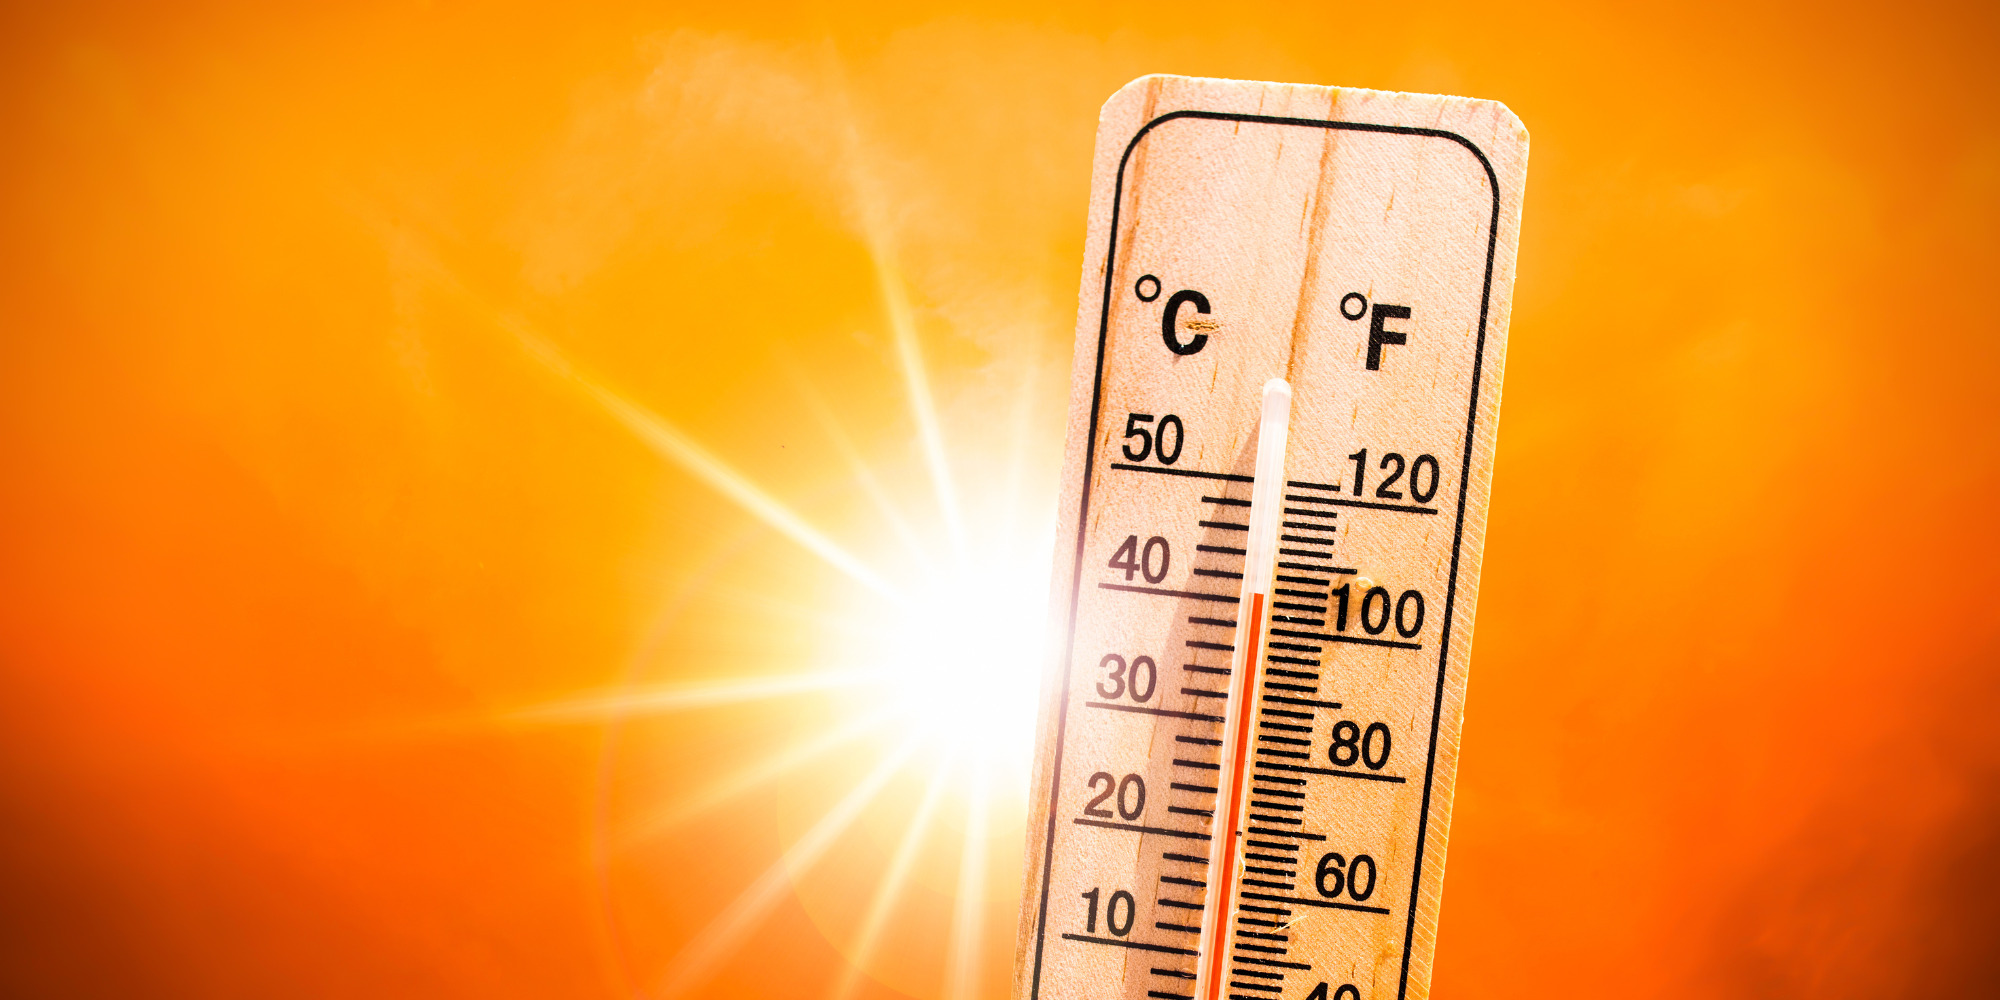 San José opens cooling centers from July 2 to 6 due to extreme heat